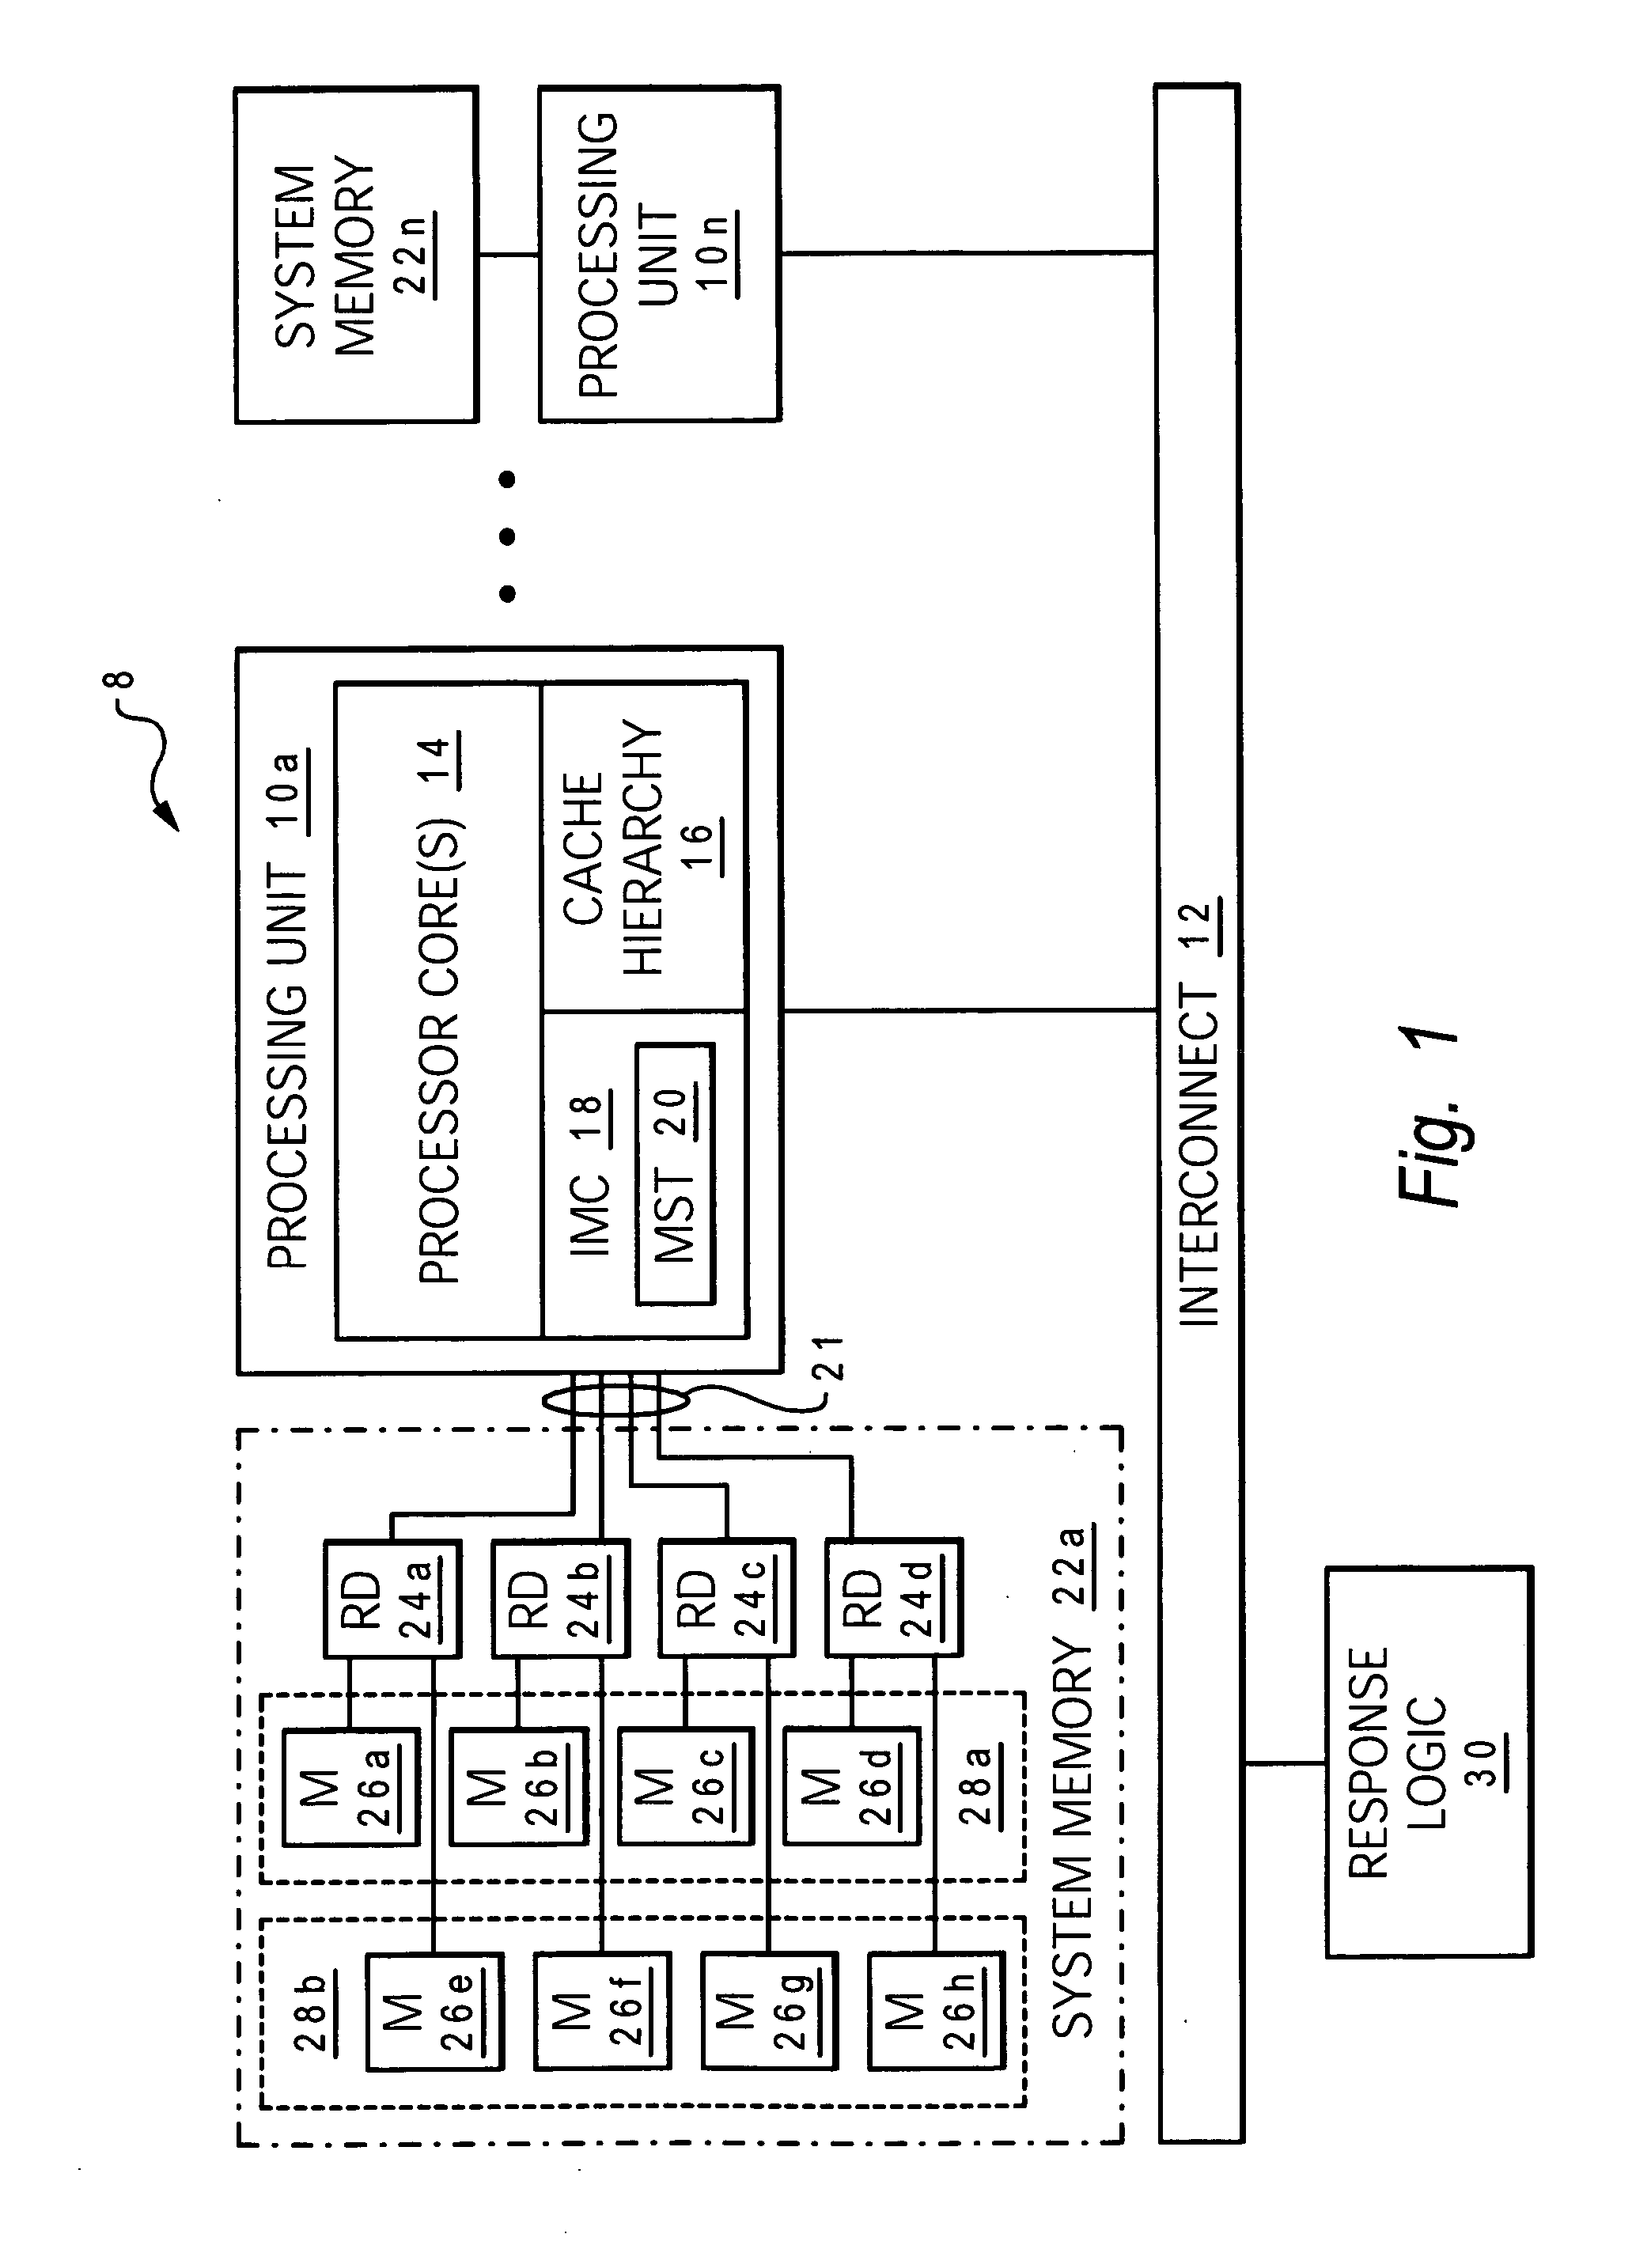 Method and system for thread-based memory speculation in a memory subsystem of a data processing system